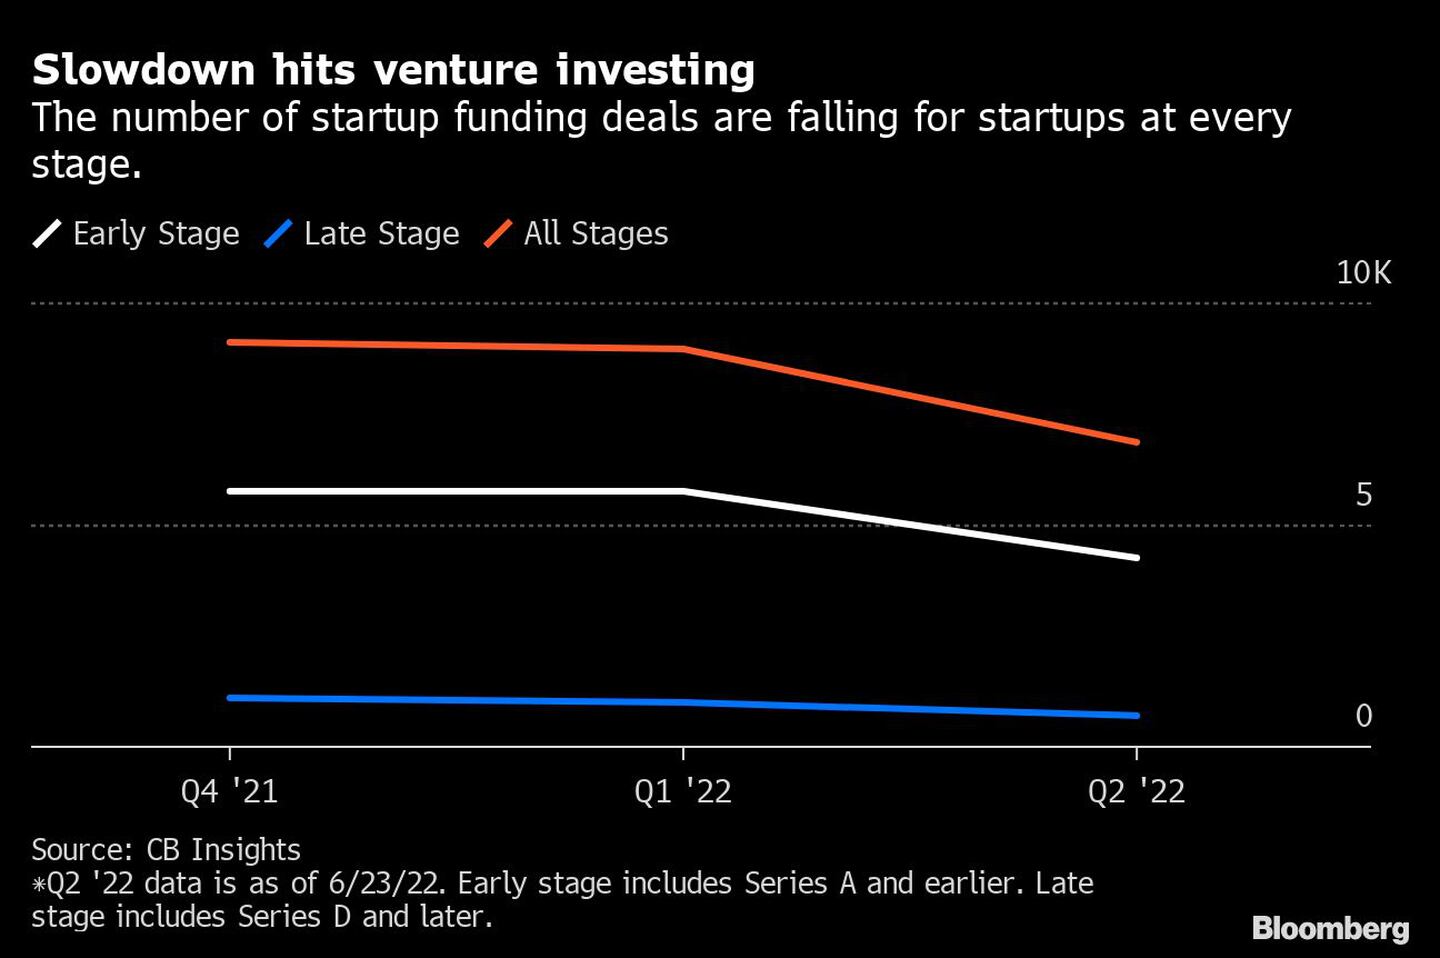 Slowdown hits venture capital investing | The number of startup funding deals is falling for startups at every stage.dfd